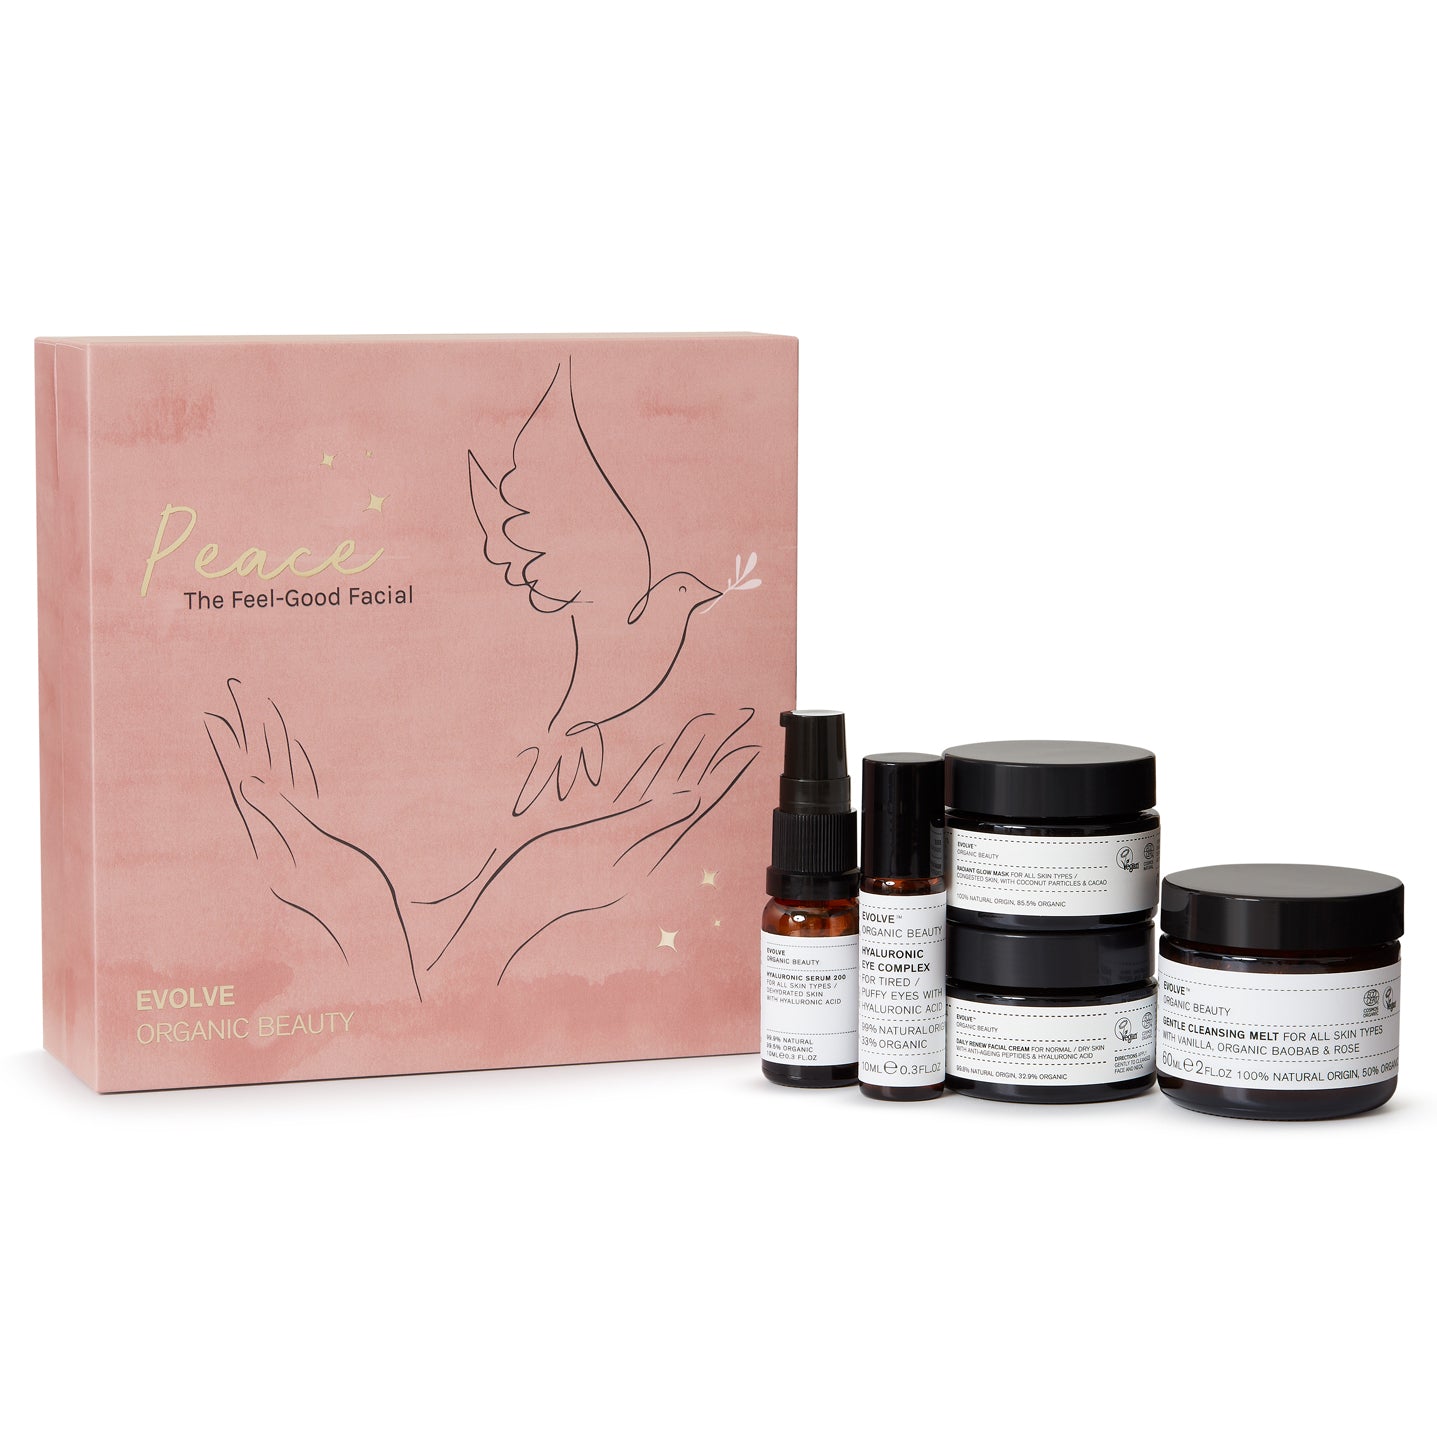 Load image into Gallery viewer, Evolve The Feel-Good Facial | Enjoy your very own at home spa experience | Vegan, Cruelty Free, Natural and Ethical gift set
